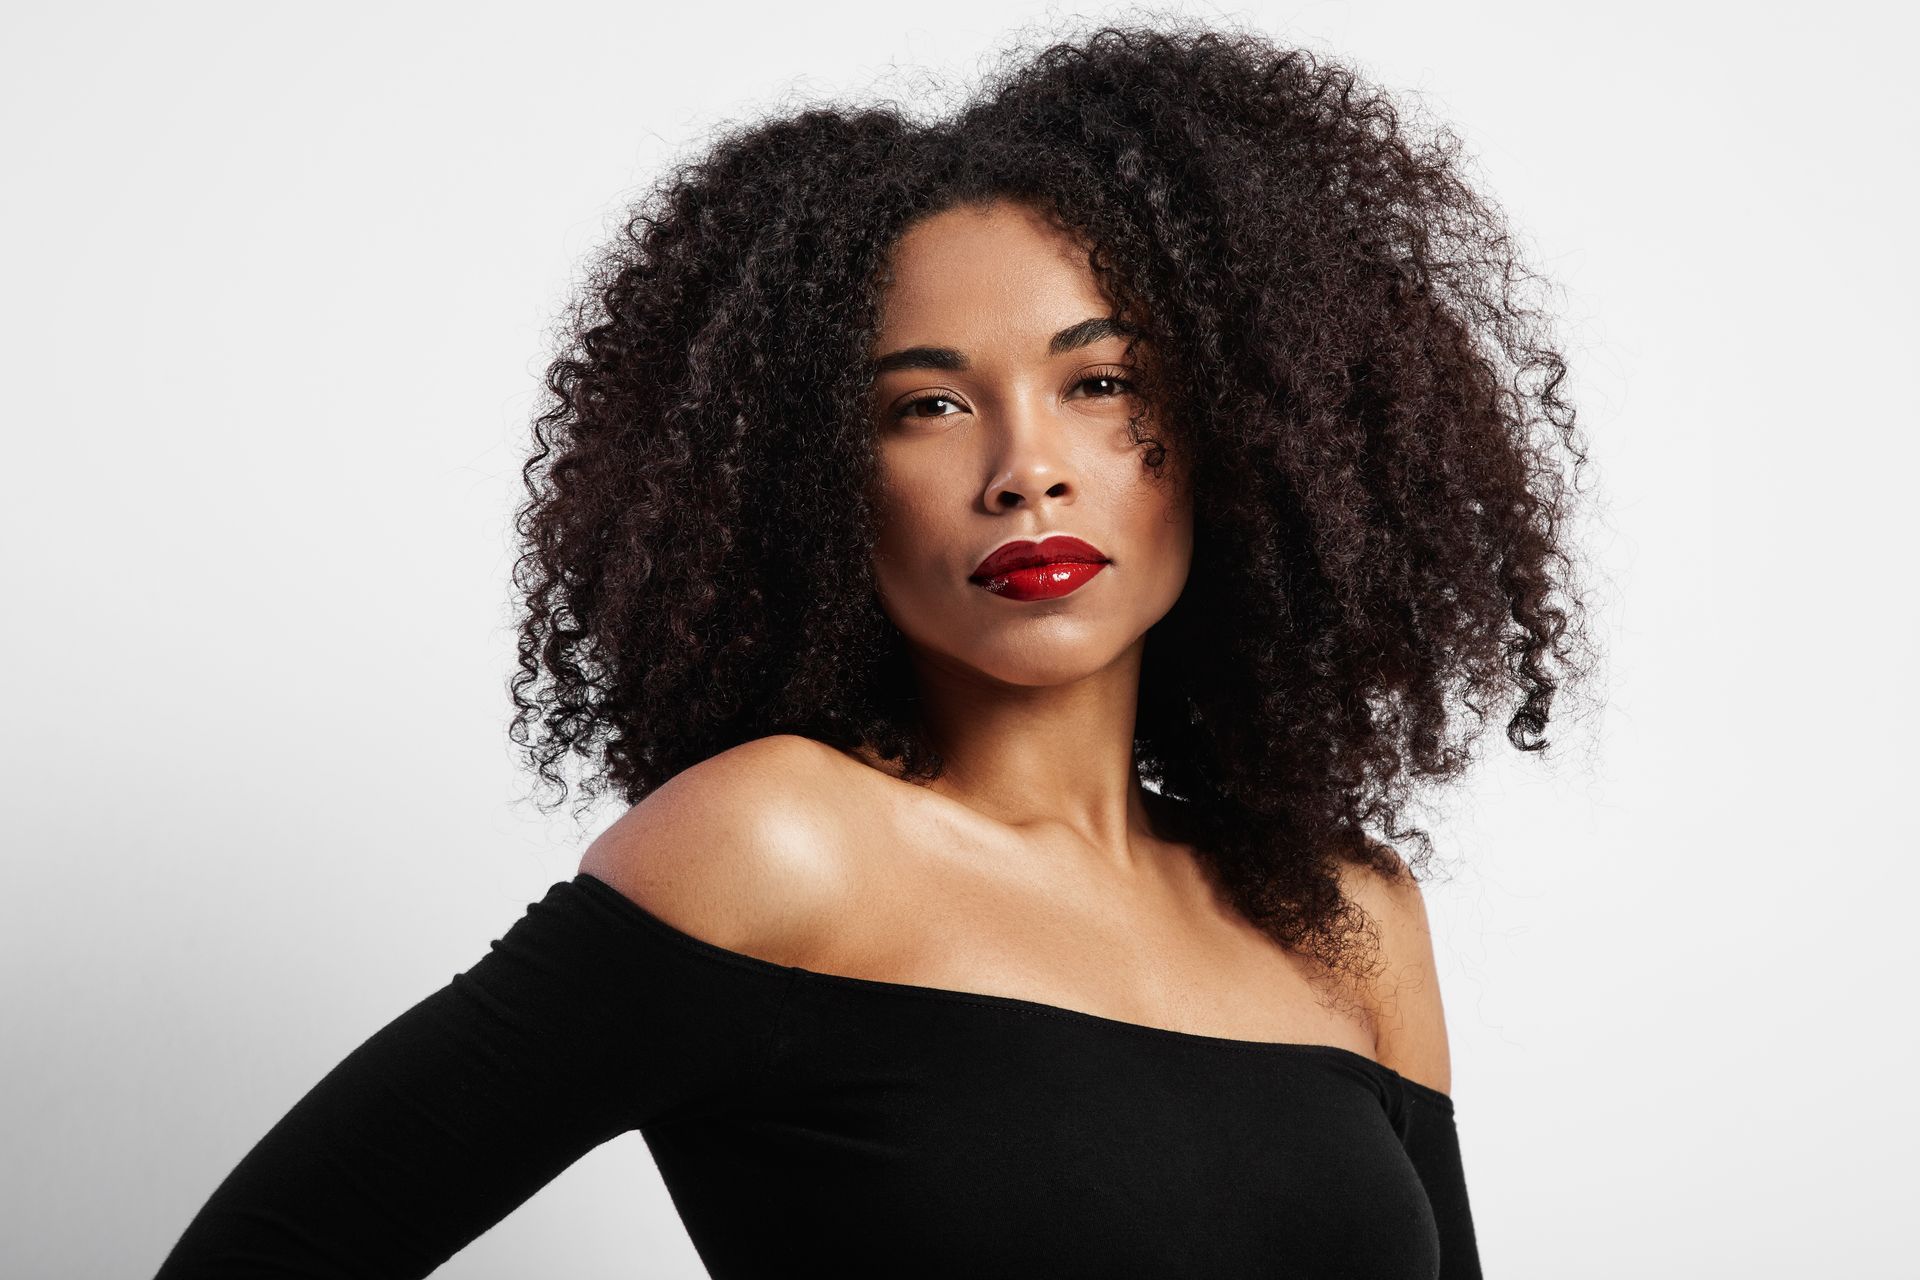 a woman with curly hair and red lipstick is wearing a black off the shoulder top